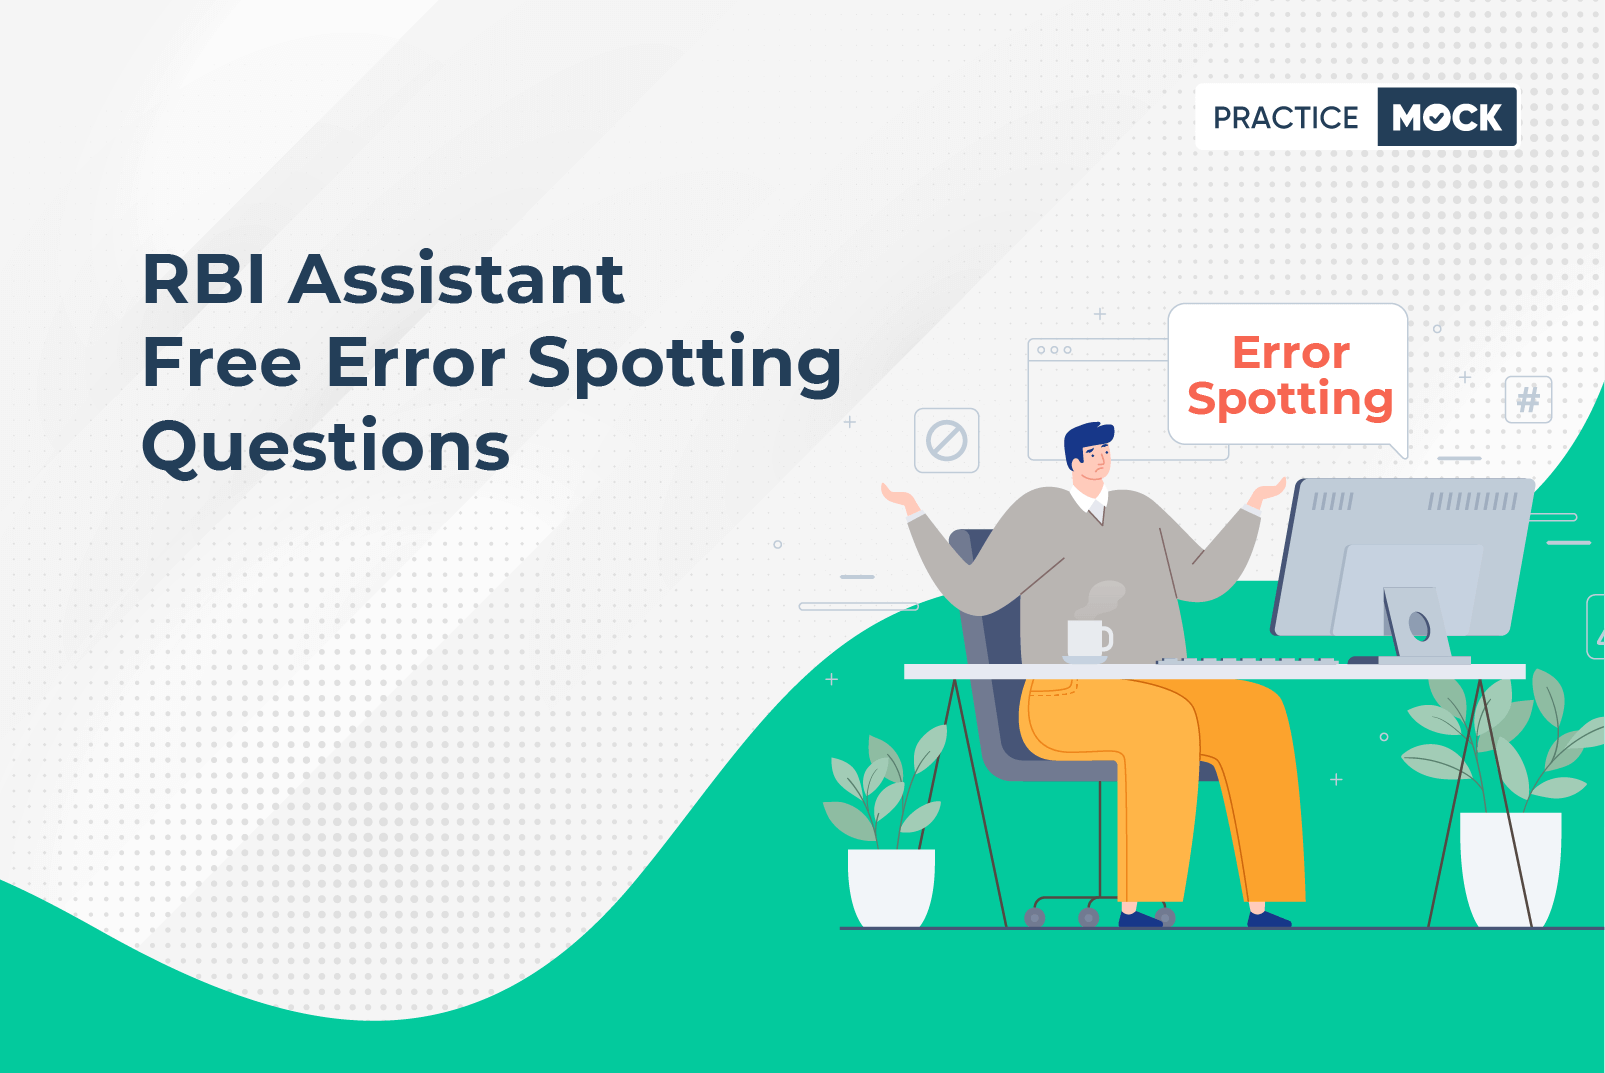 RBI Assistant Free Error Spotting Questions